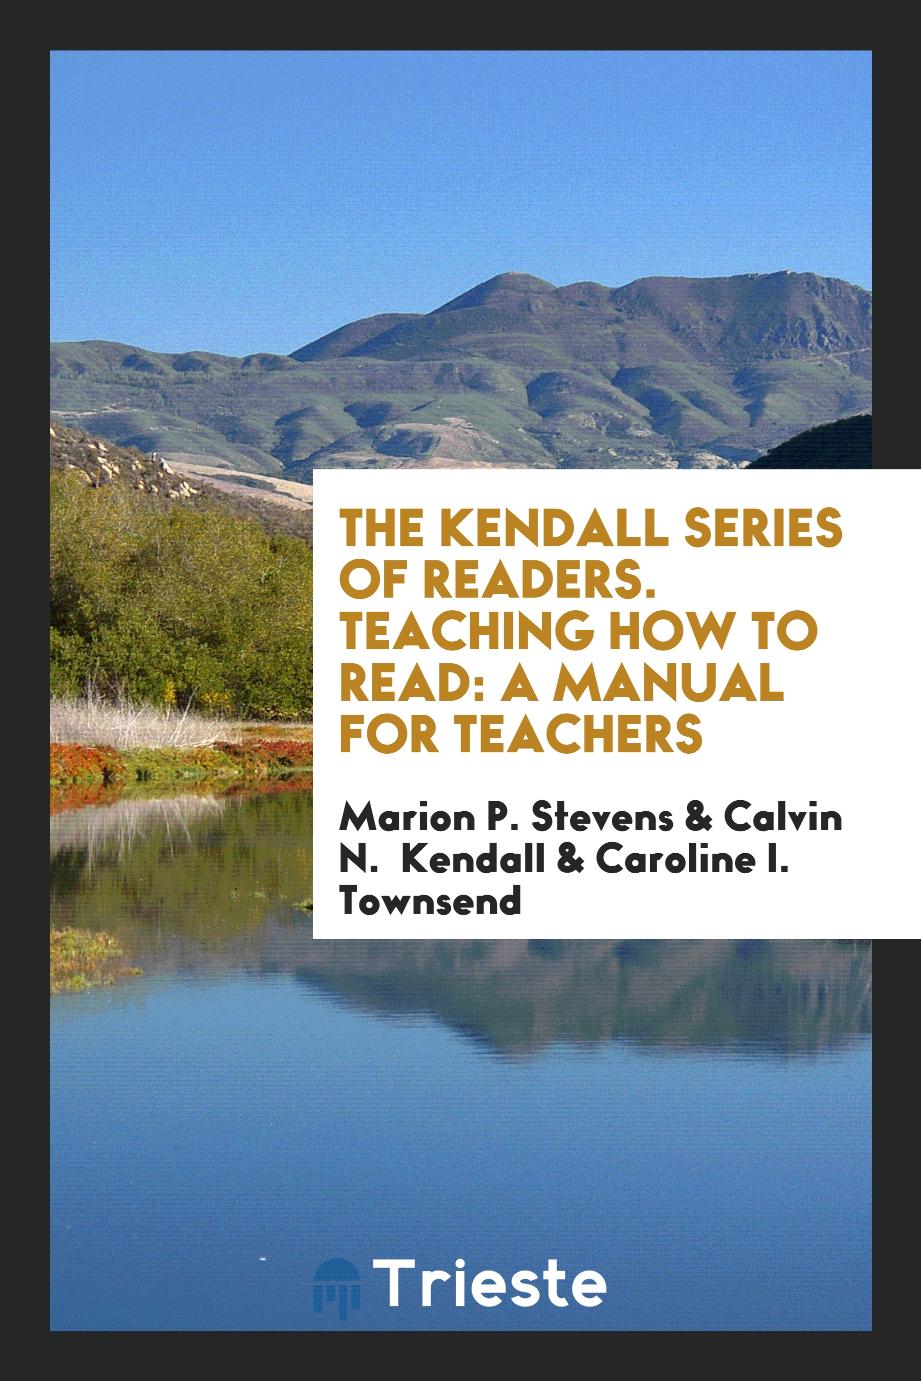 The Kendall Series of Readers. Teaching How to Read: A Manual for Teachers